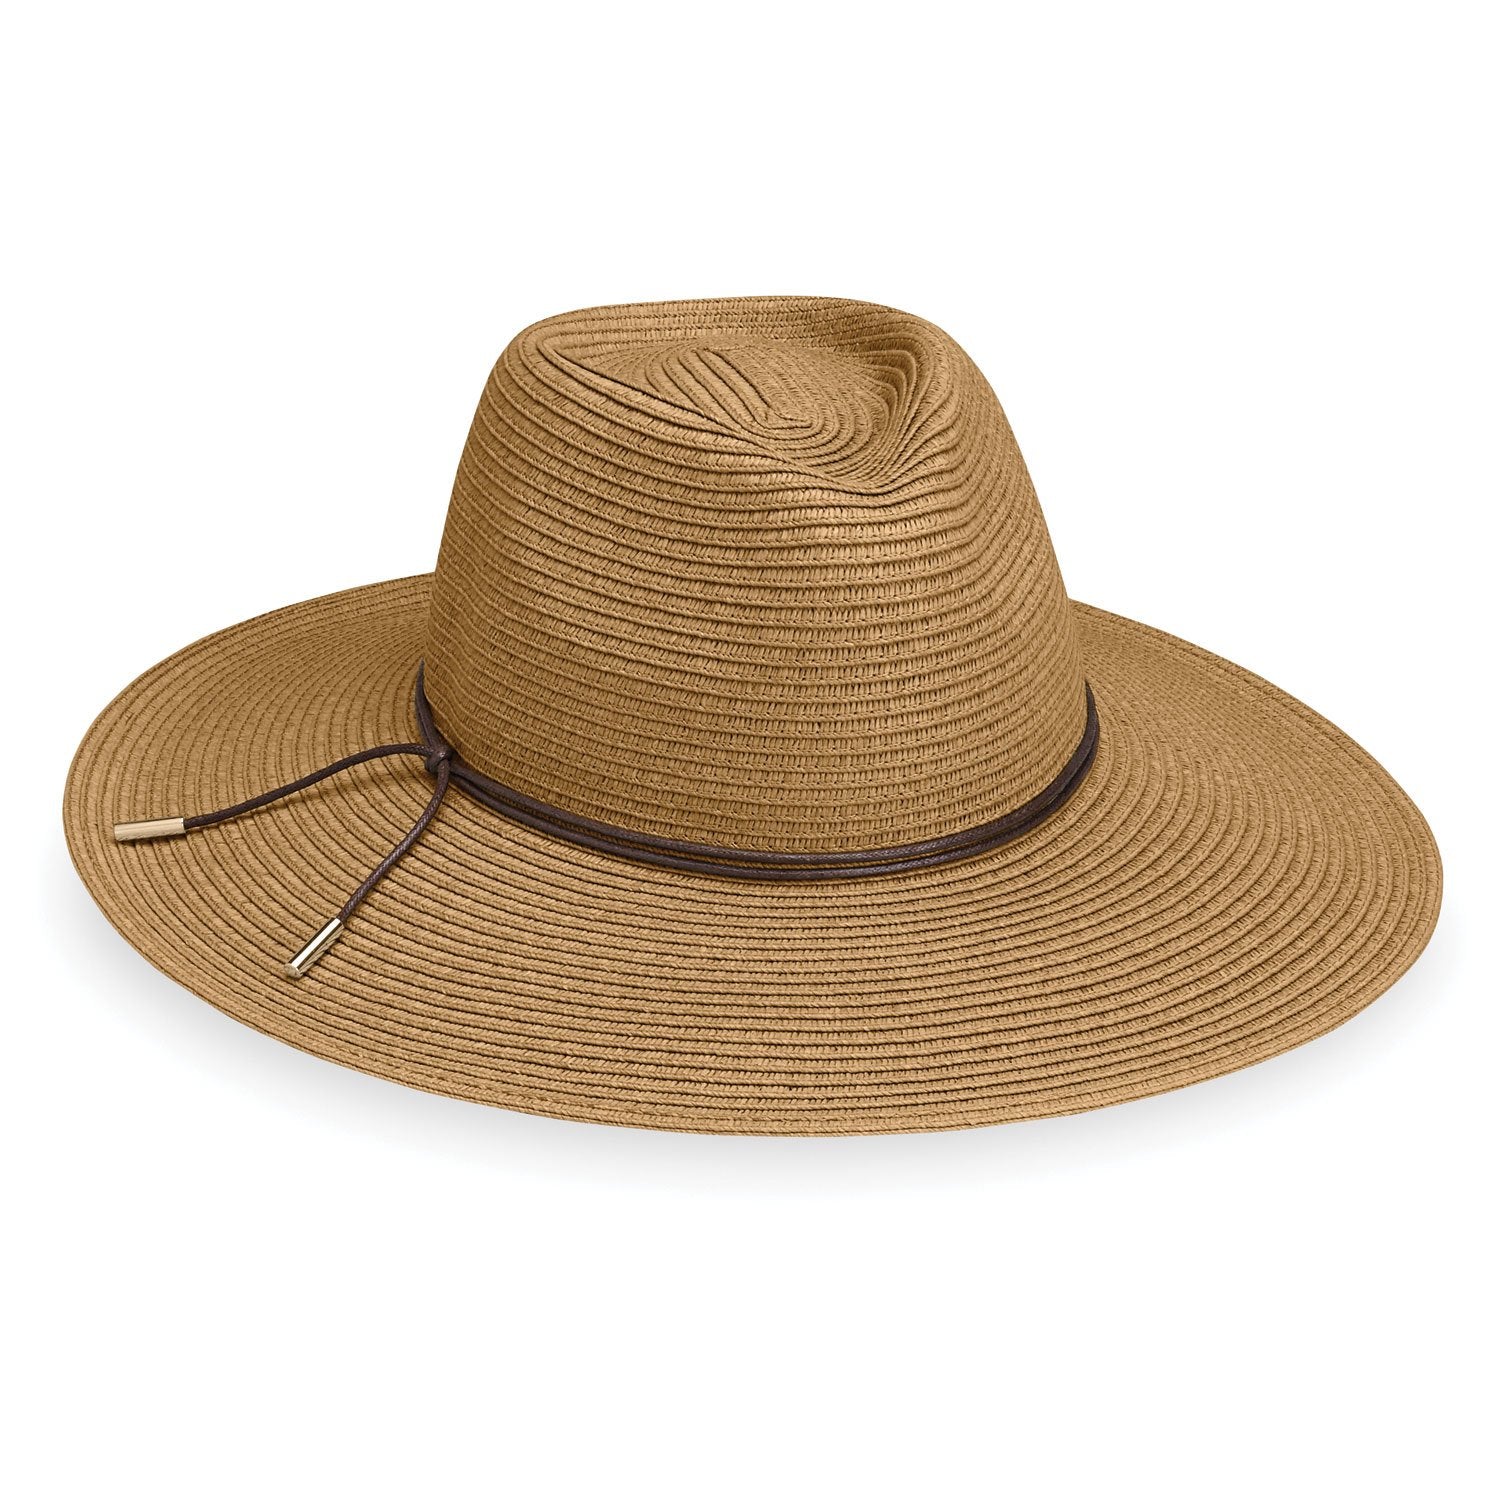 Featuring Front of Women's Packable Wide Brim Fedora Style Montecito UPF Sun Hat in Camel from Wallaroo